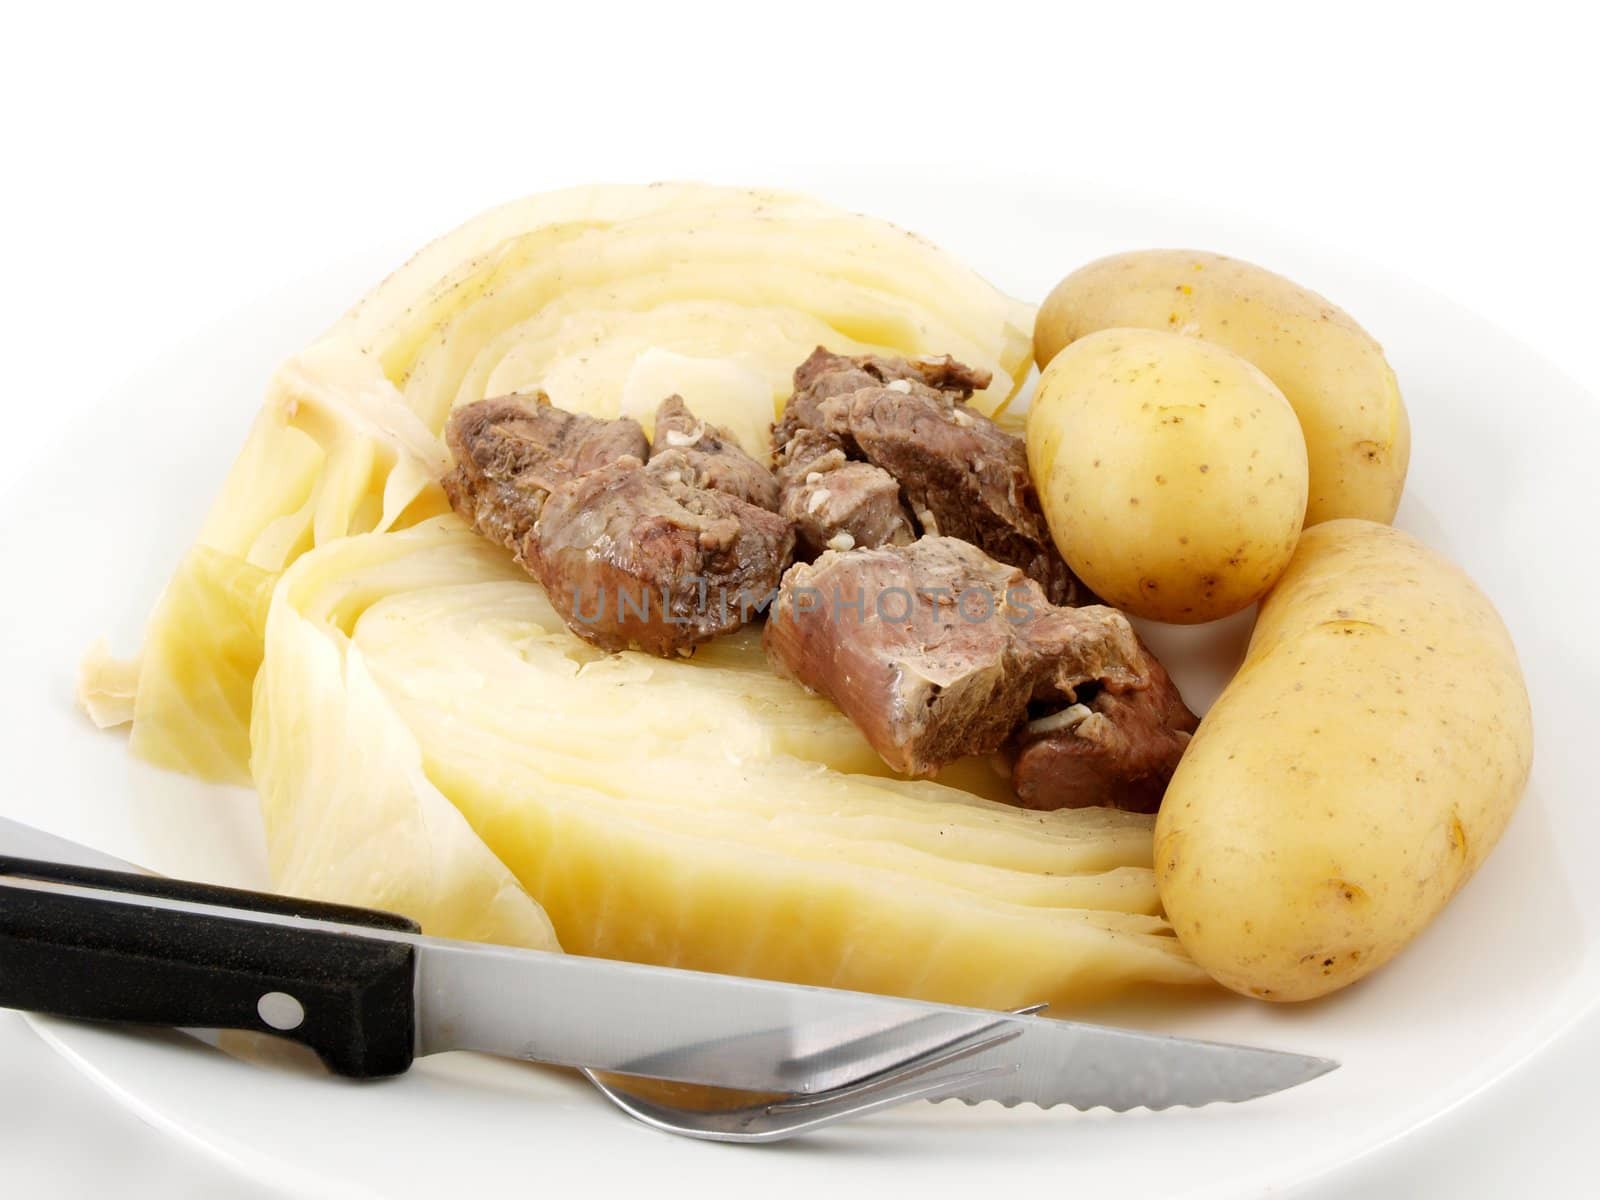 Boiled meat and cabbage, with potatoes, knife and fork, white plate towards white background